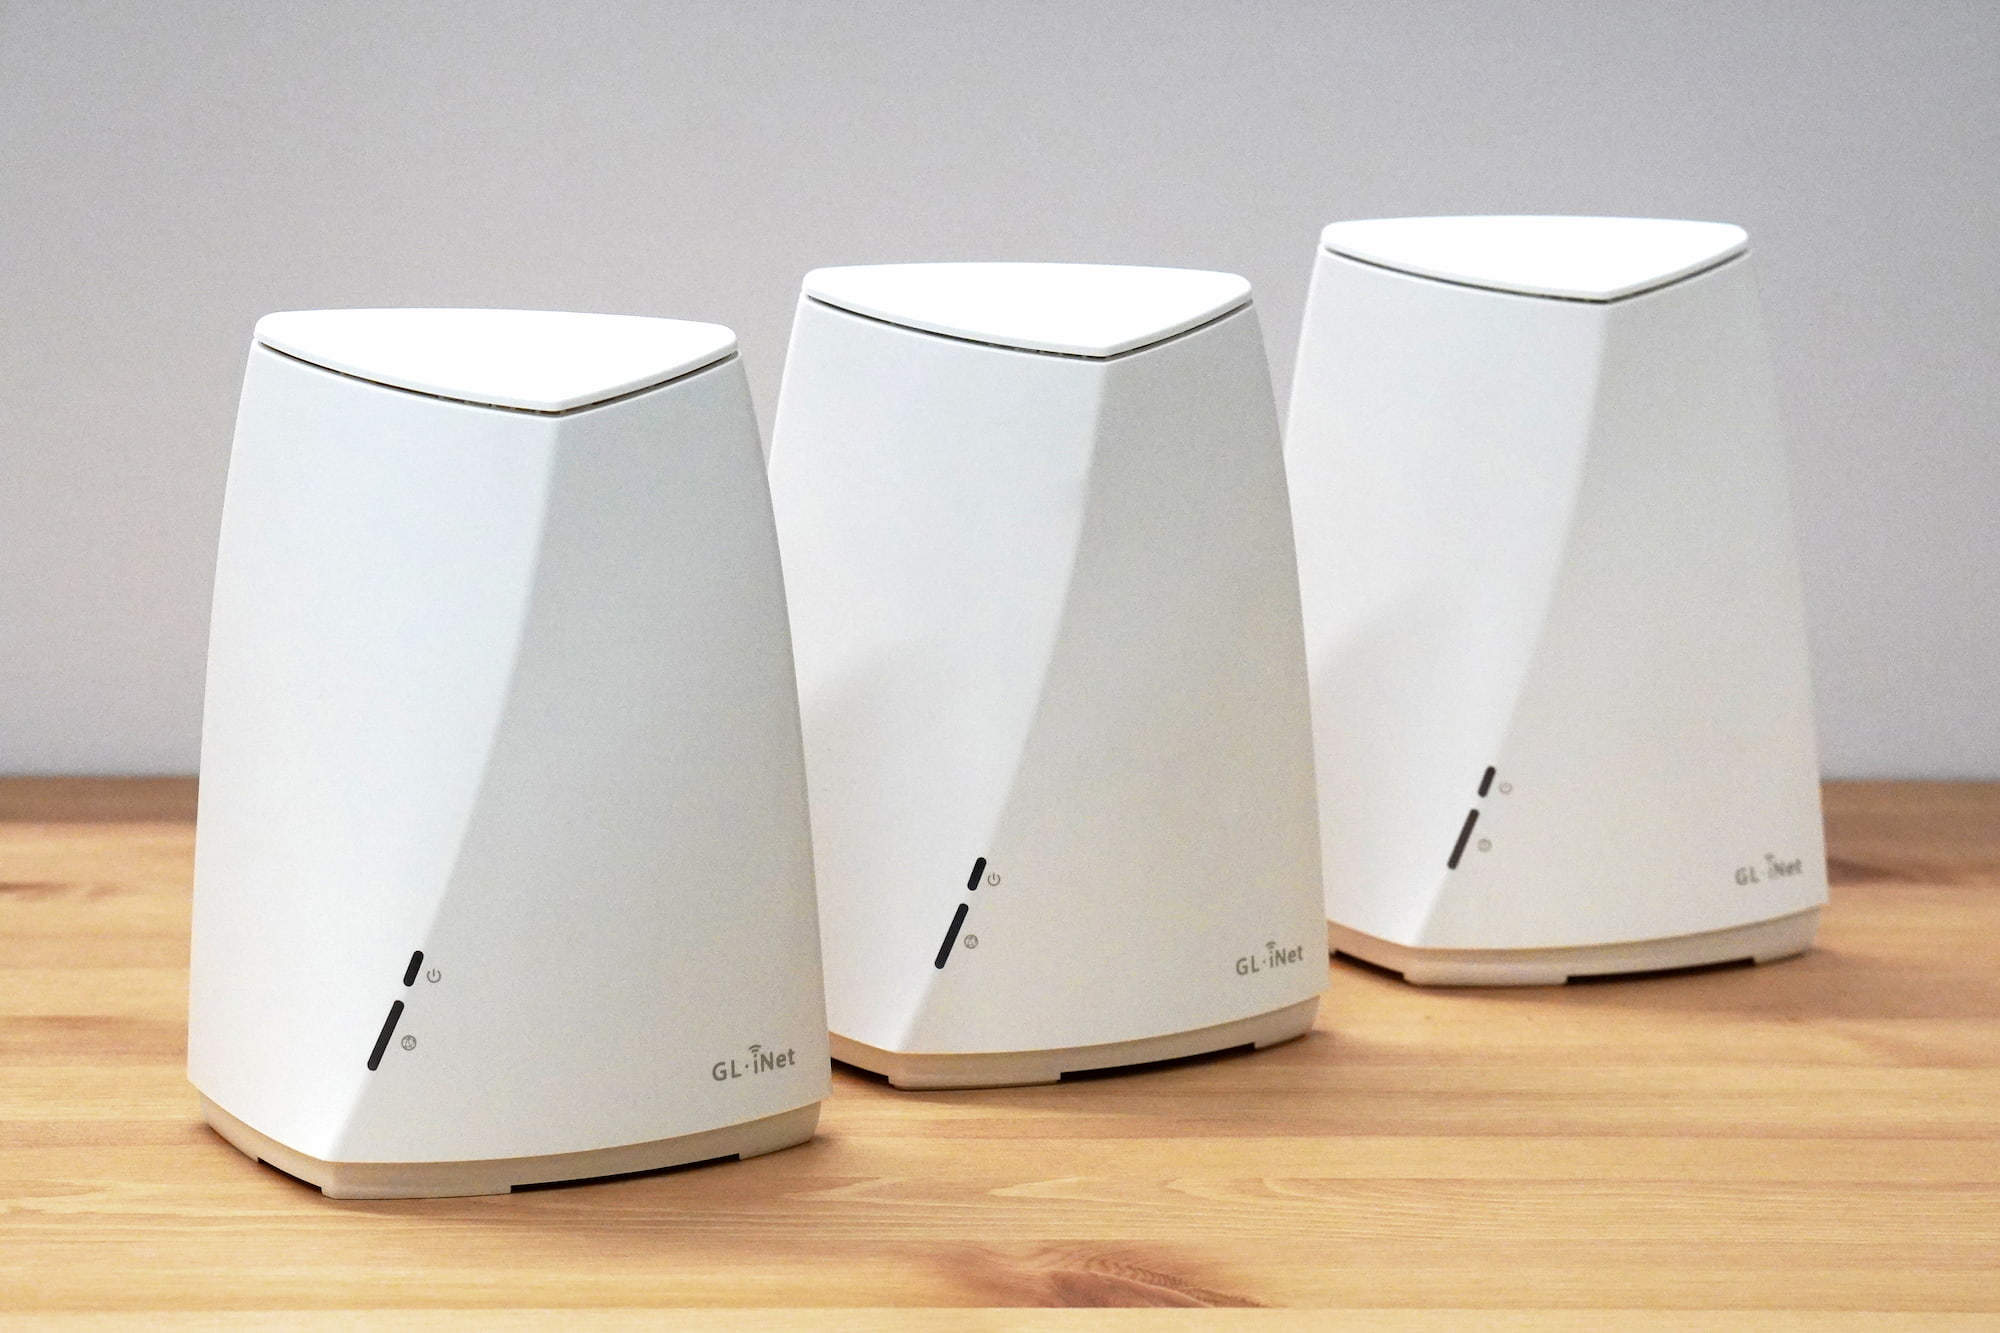 GL.iNet Starts Pre-Orders For Its First Tri-Band Mesh Wireless